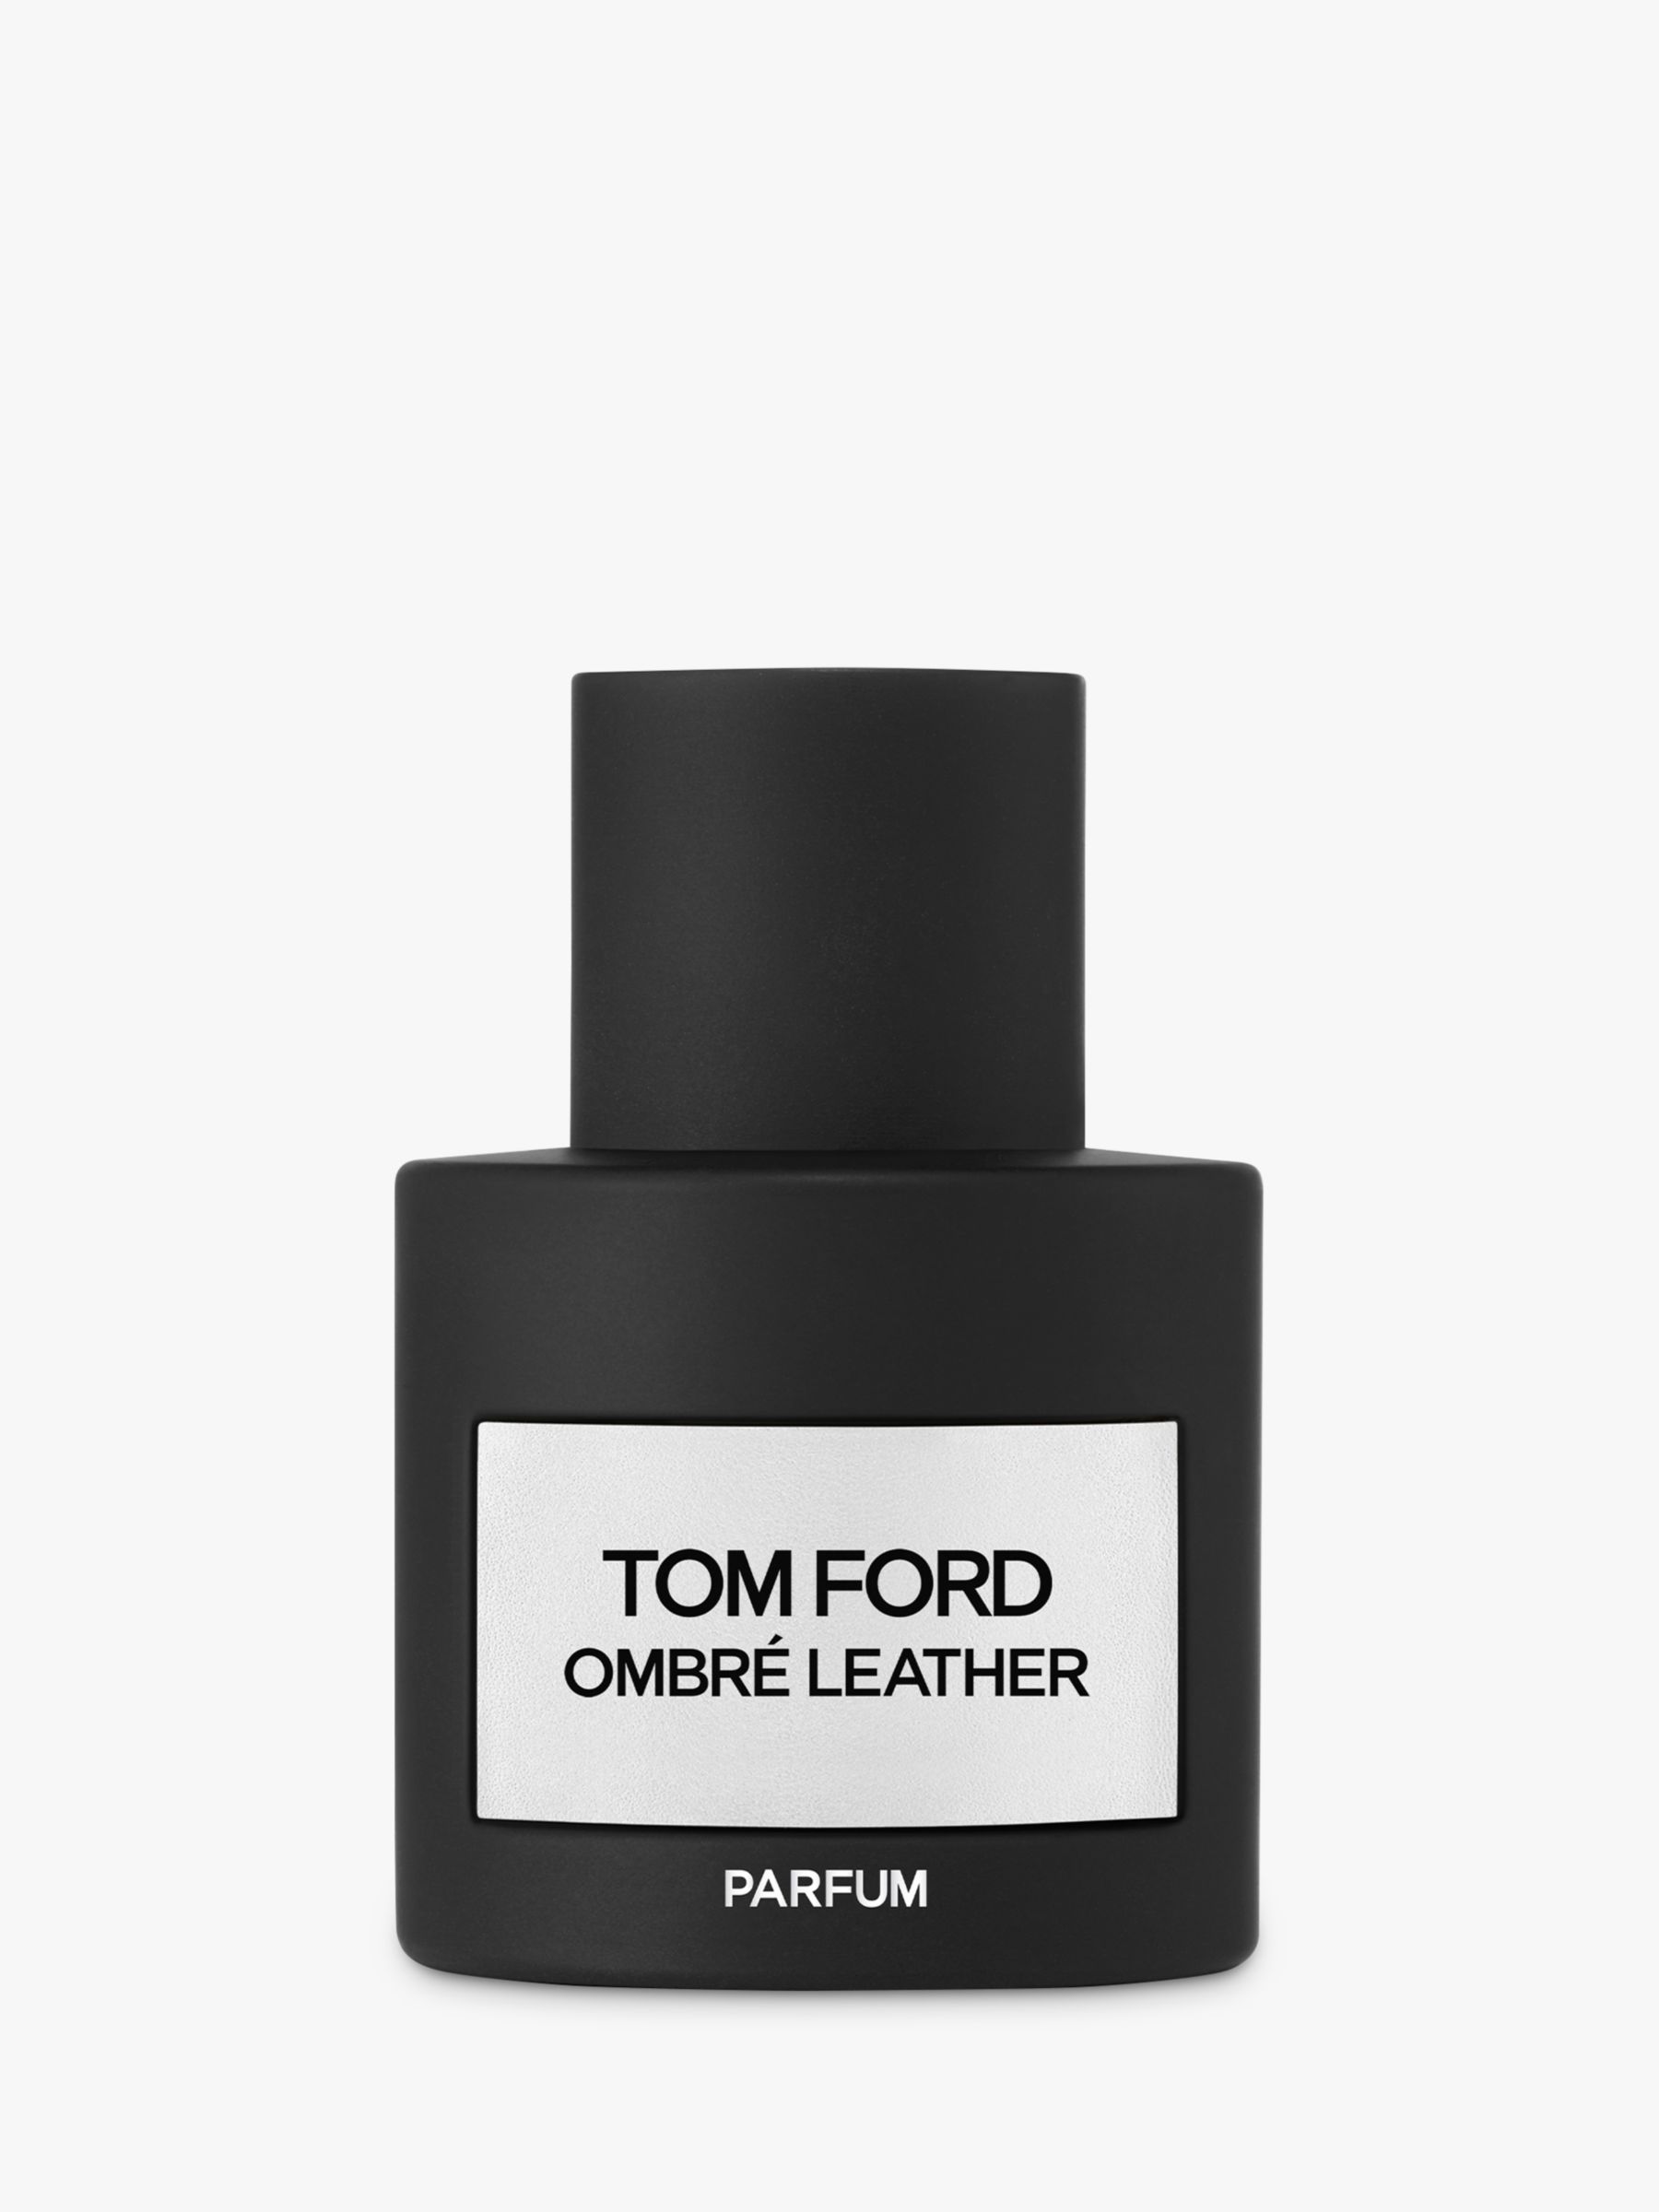 TOMFOTOM FORD 香水 OMBR LEATHER  100ml